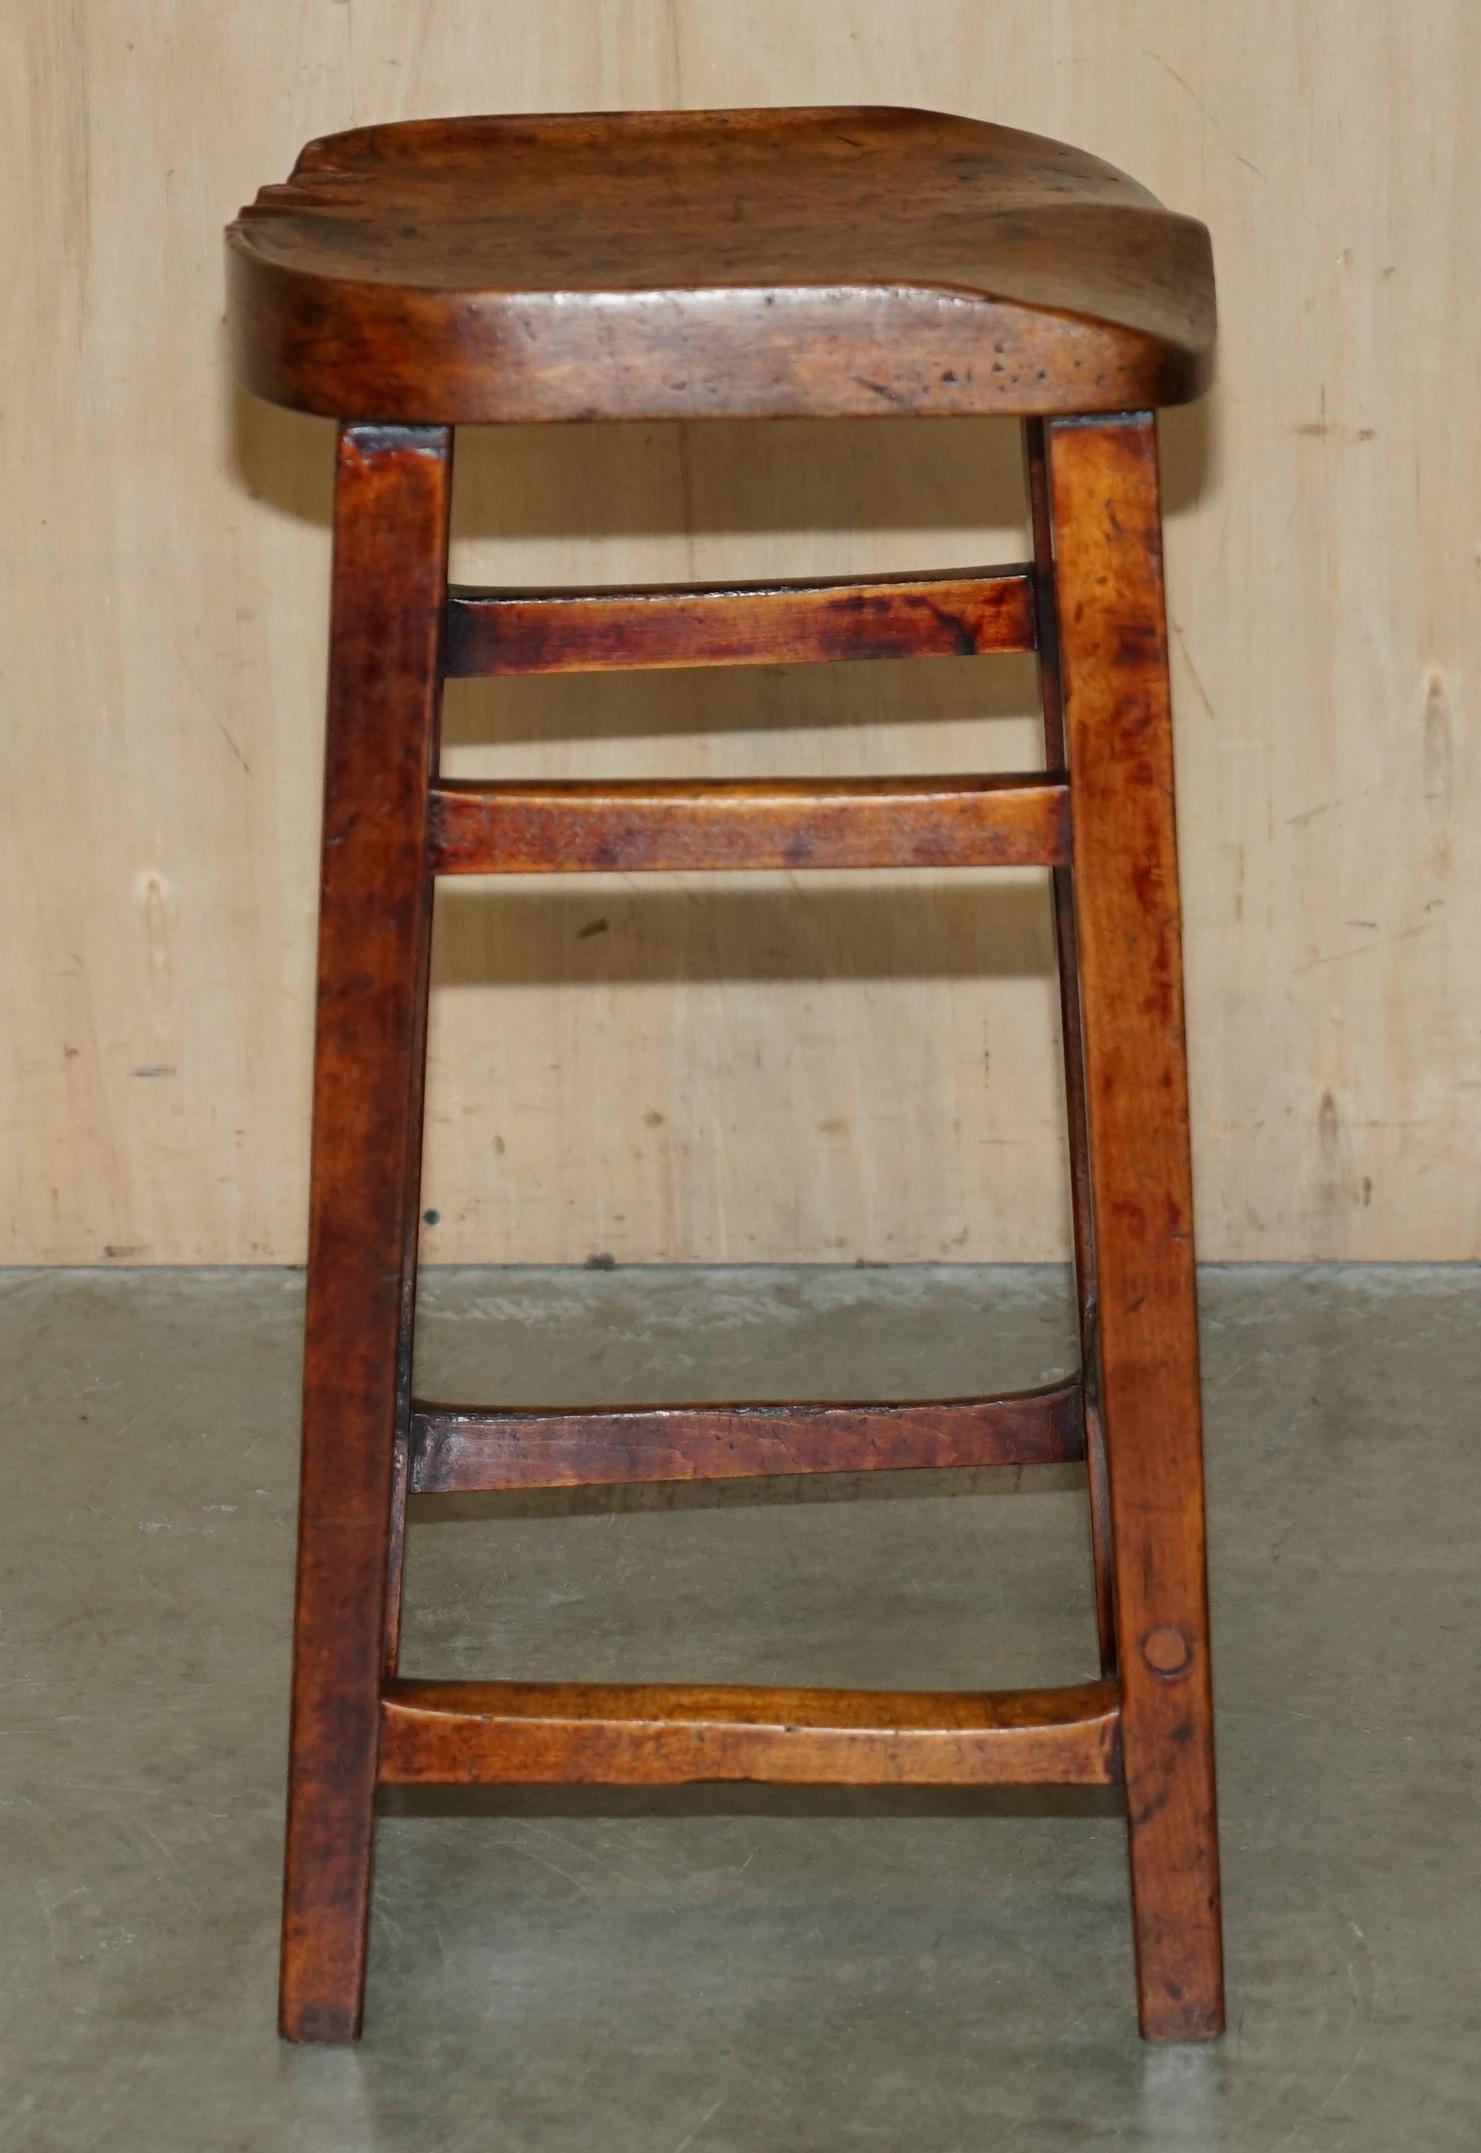 EXQUISITE CIRCA 1880 HAND MADE FRUiTWOOD DRAFTSMAN ARTIST STOOL STUNNING PATINA For Sale 1